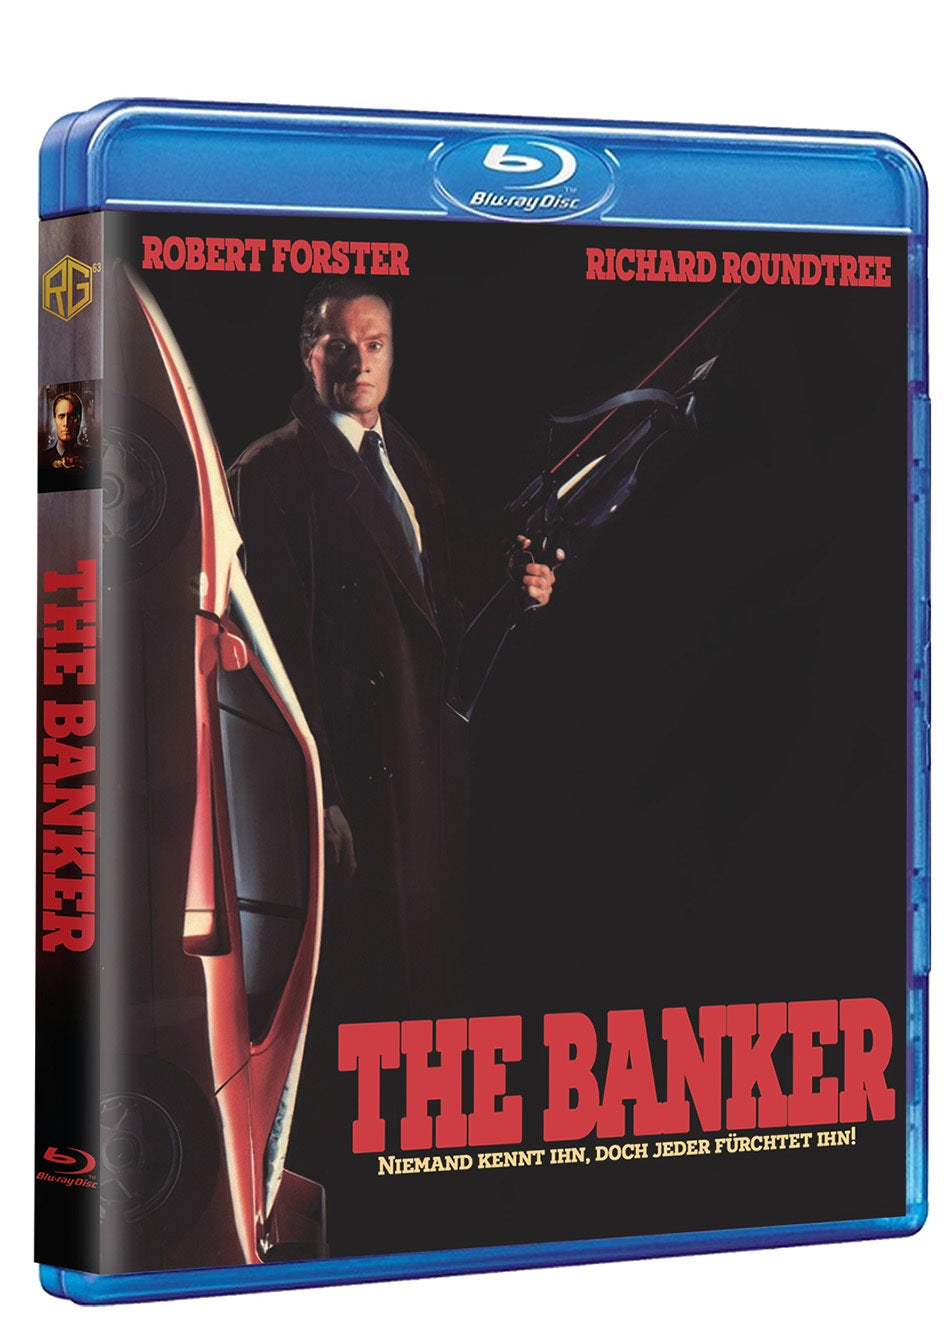 The Banker (1989) Bluray Cover B